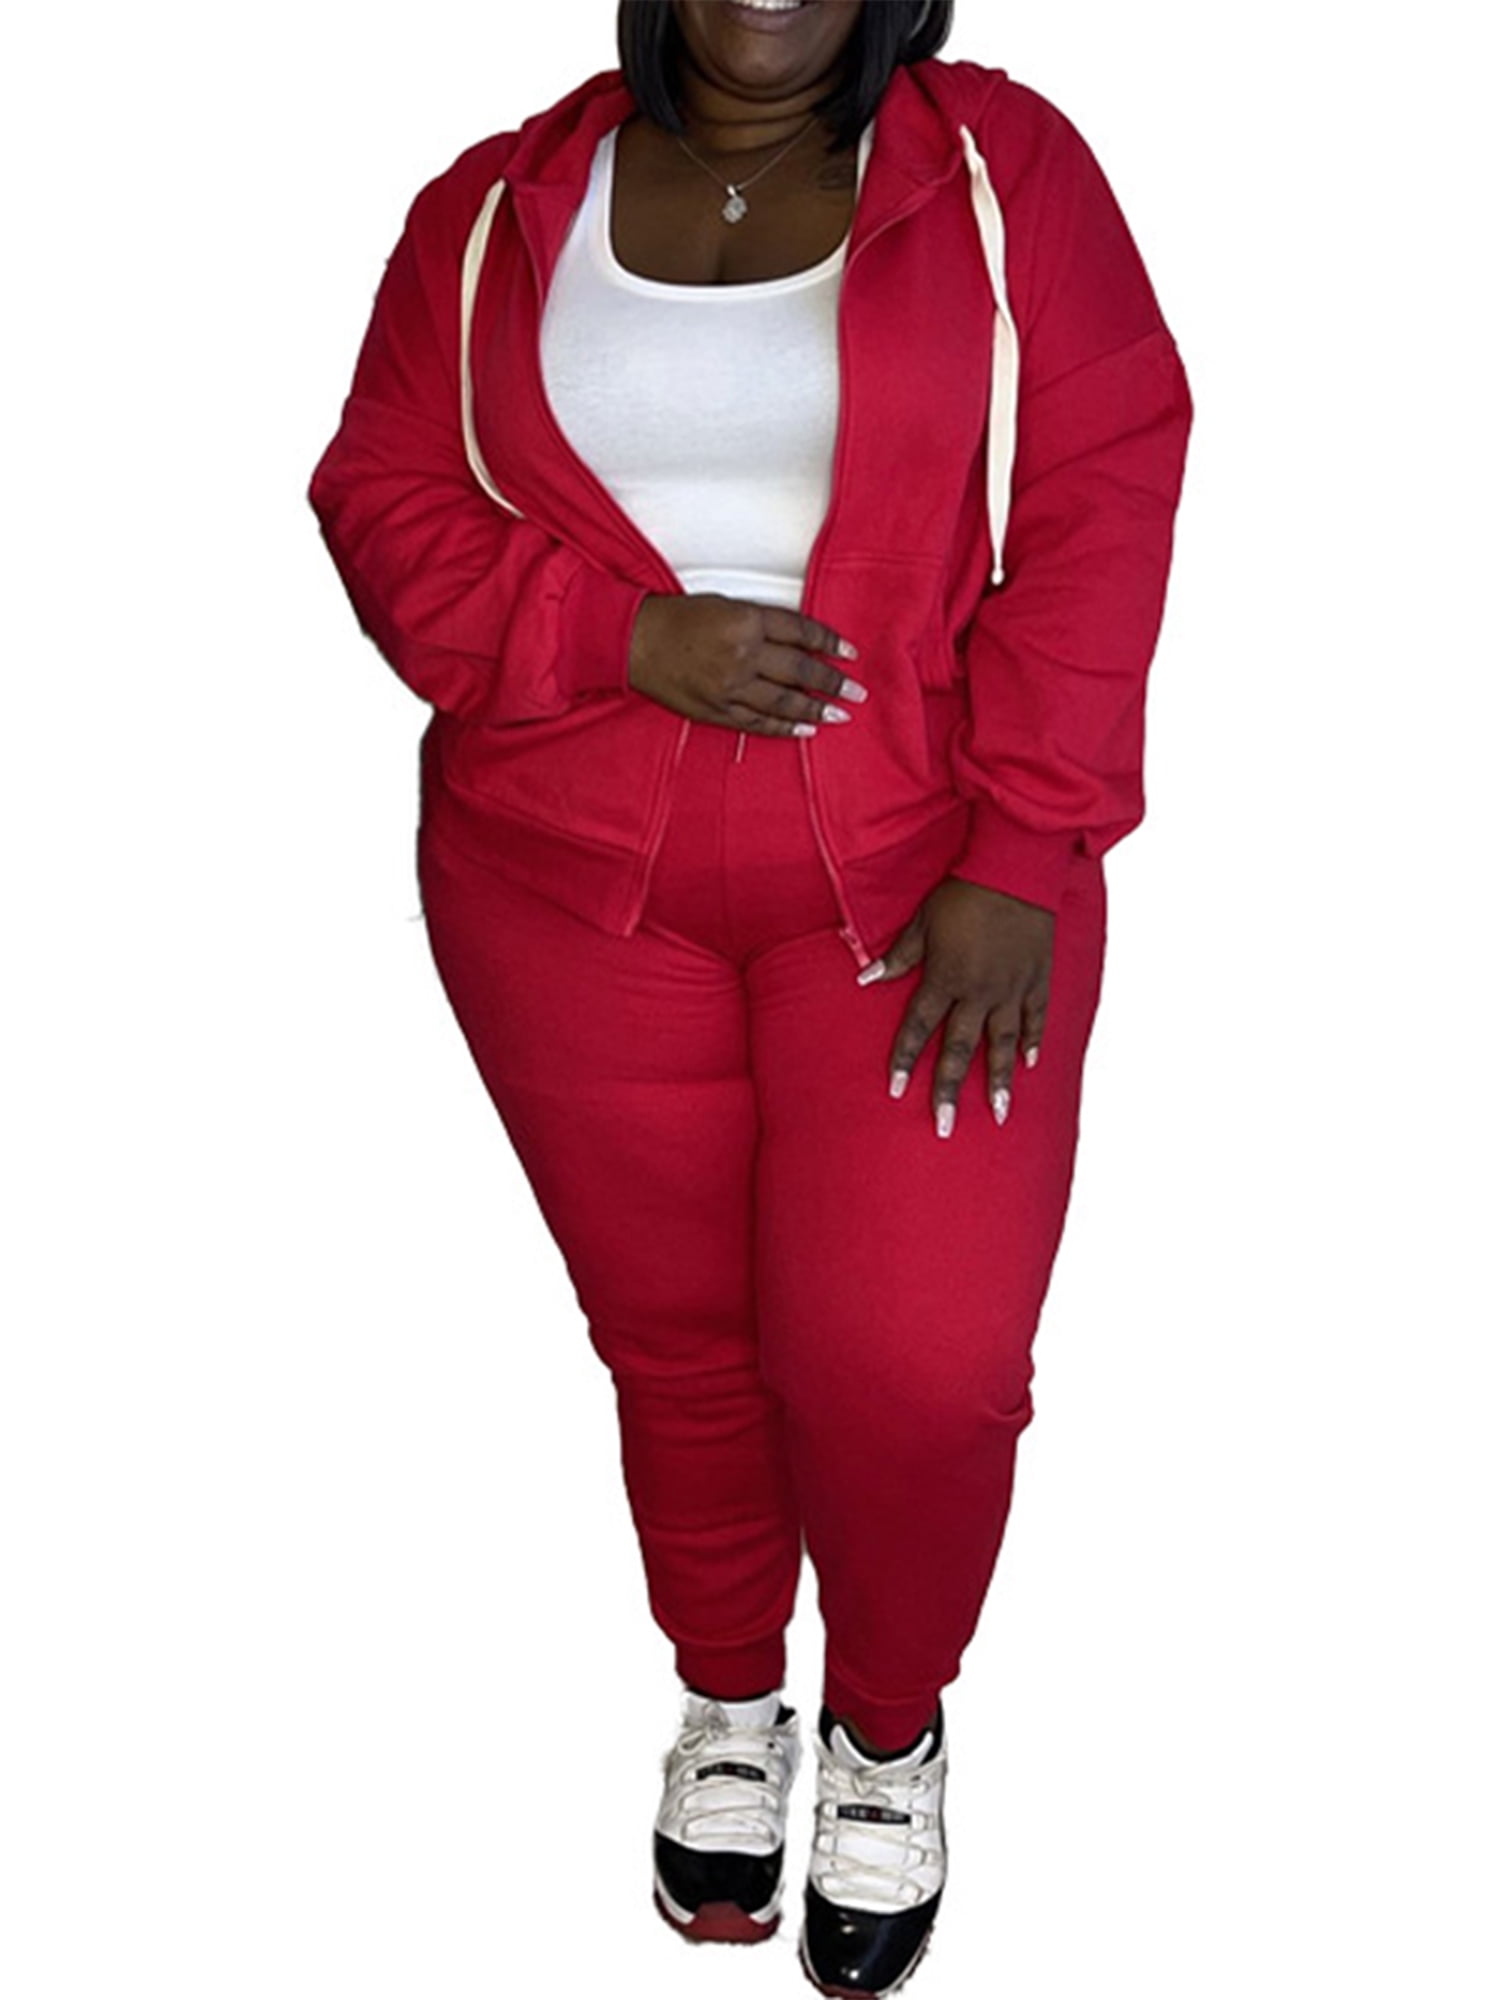 Sweatsuit for Women Casual Tracksuit Sleeve Sweatshirt and 2 Piece Solid Outfit Sweat Suit Red 4XL - Walmart.com